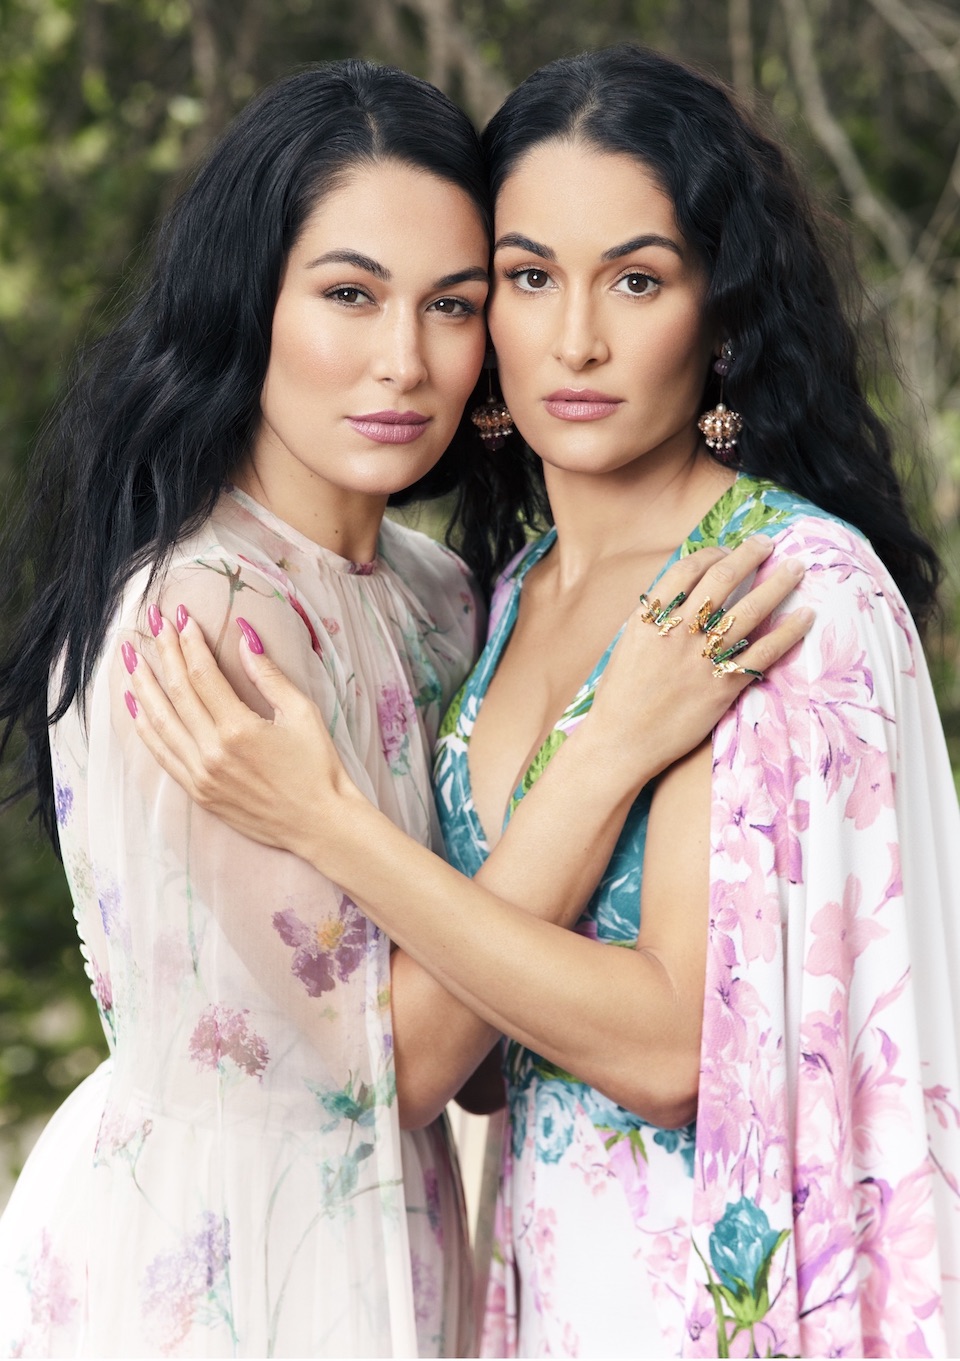 WWE Divas Brie Bella and Nikki Bella attend a photocall to promote